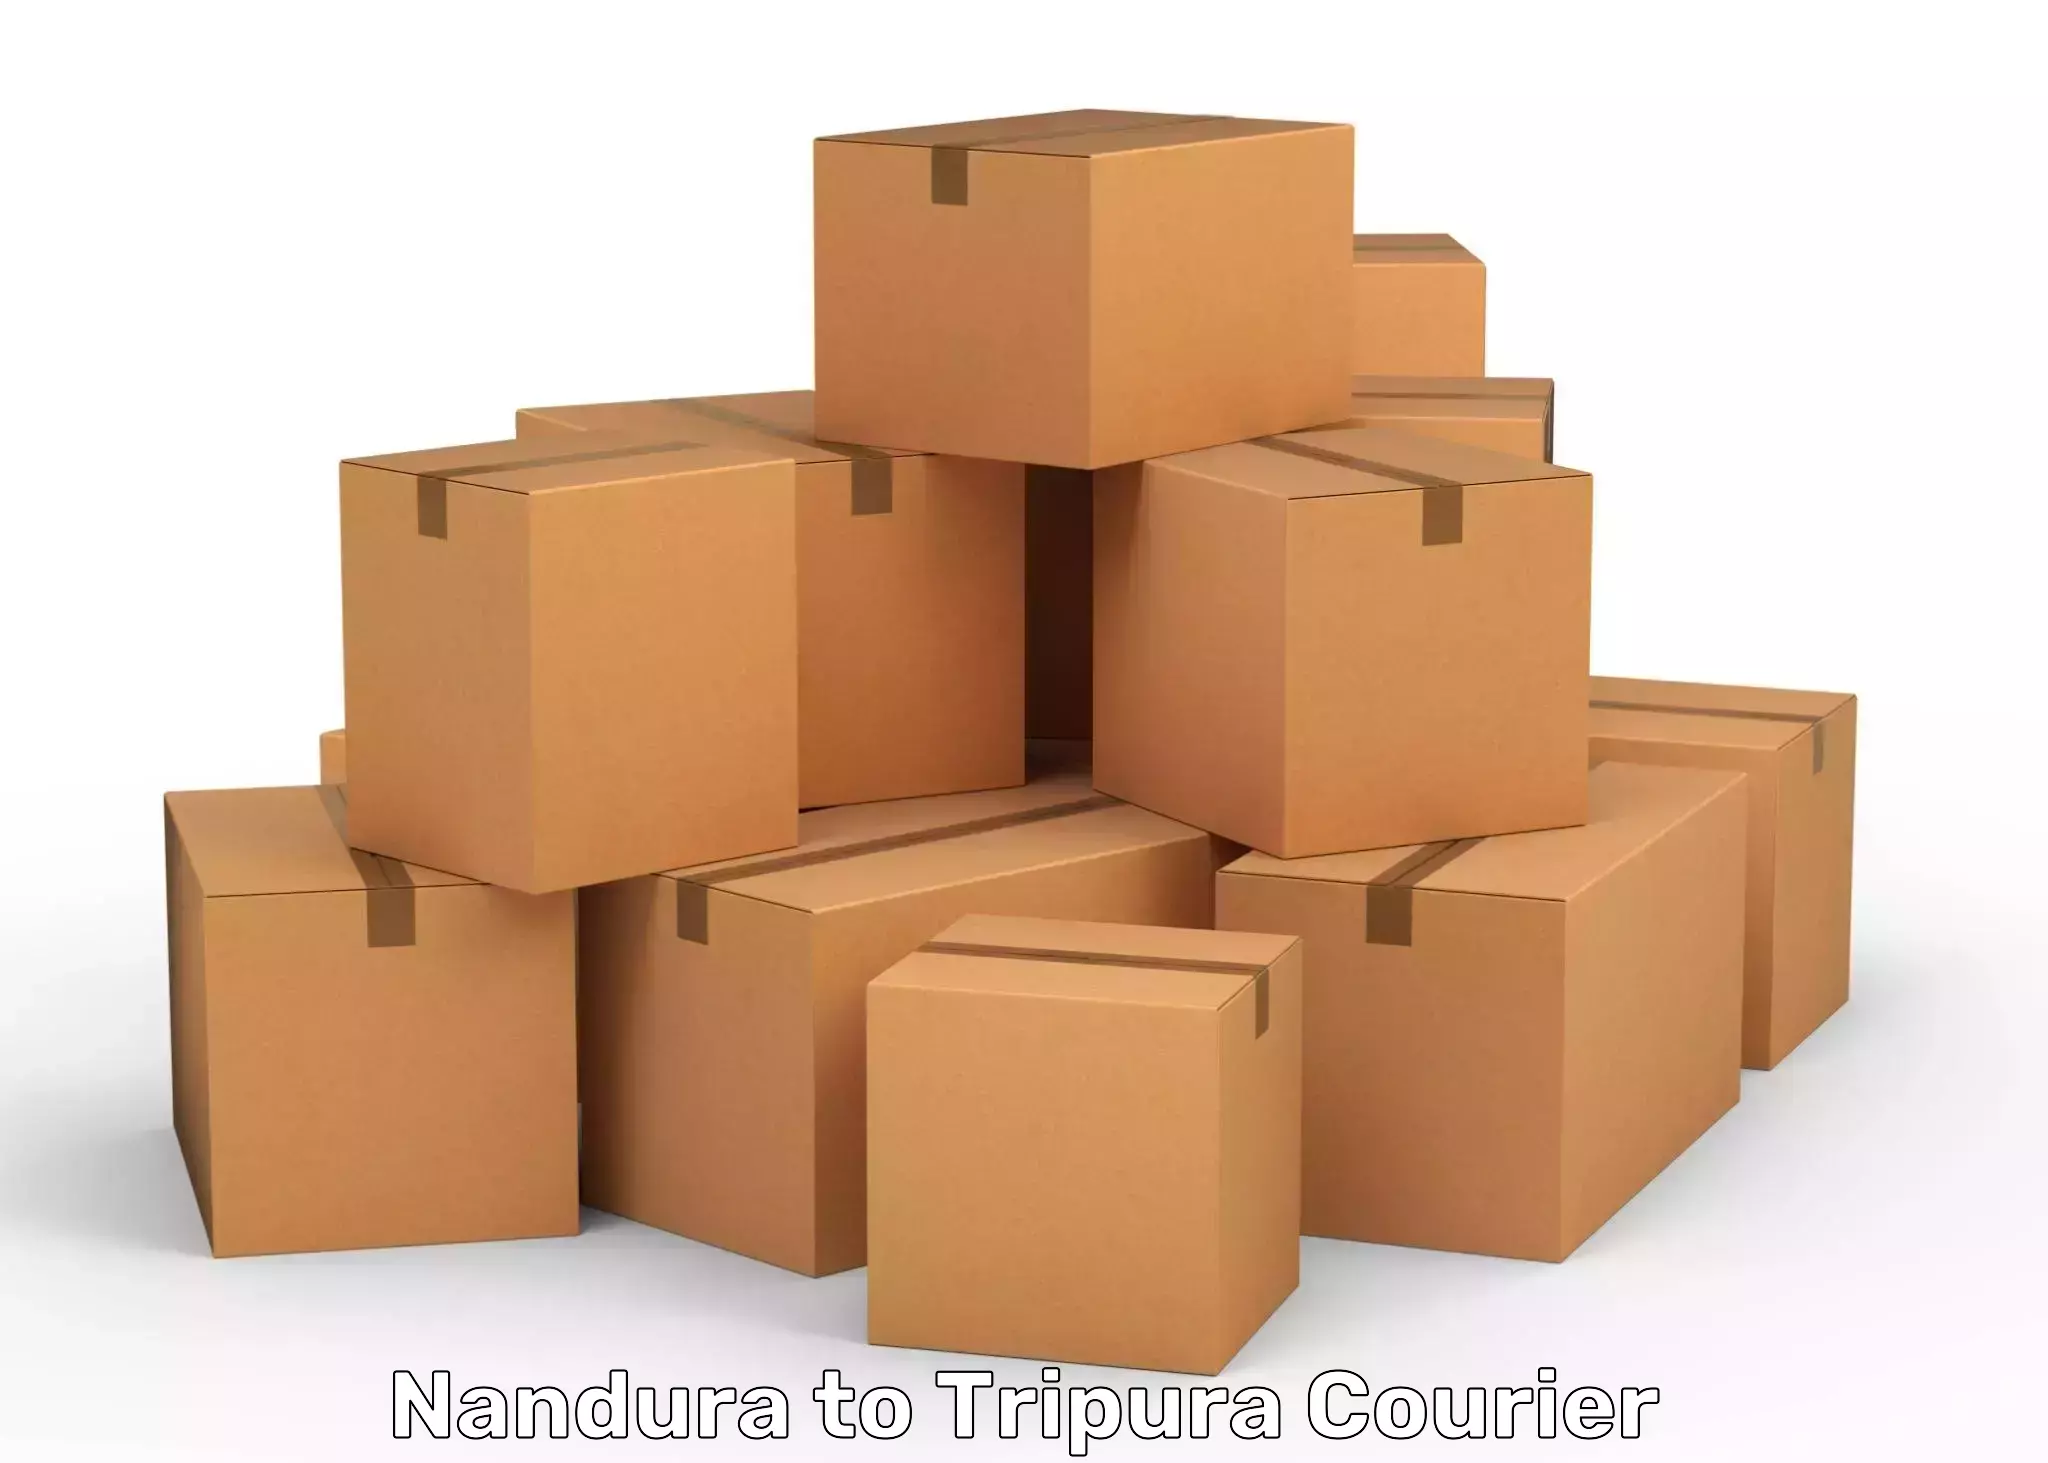 Cost-effective shipping solutions Nandura to Udaipur Tripura